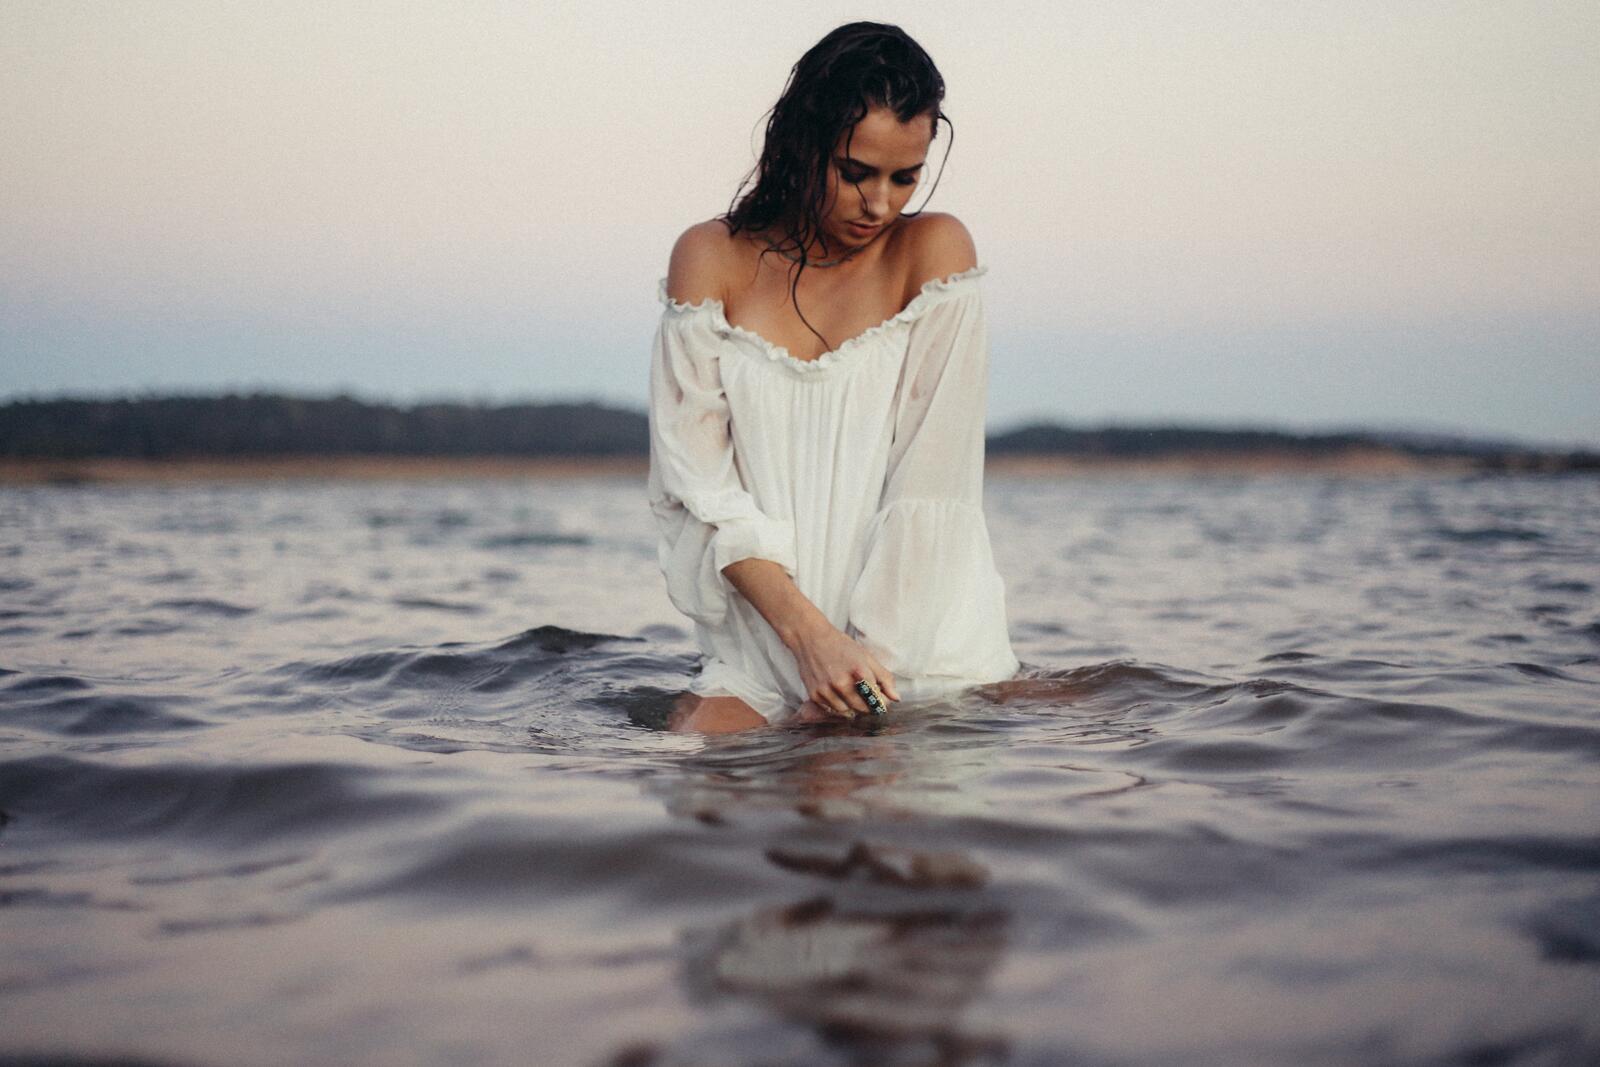 Free photo A girl in a white nightie walks into a river